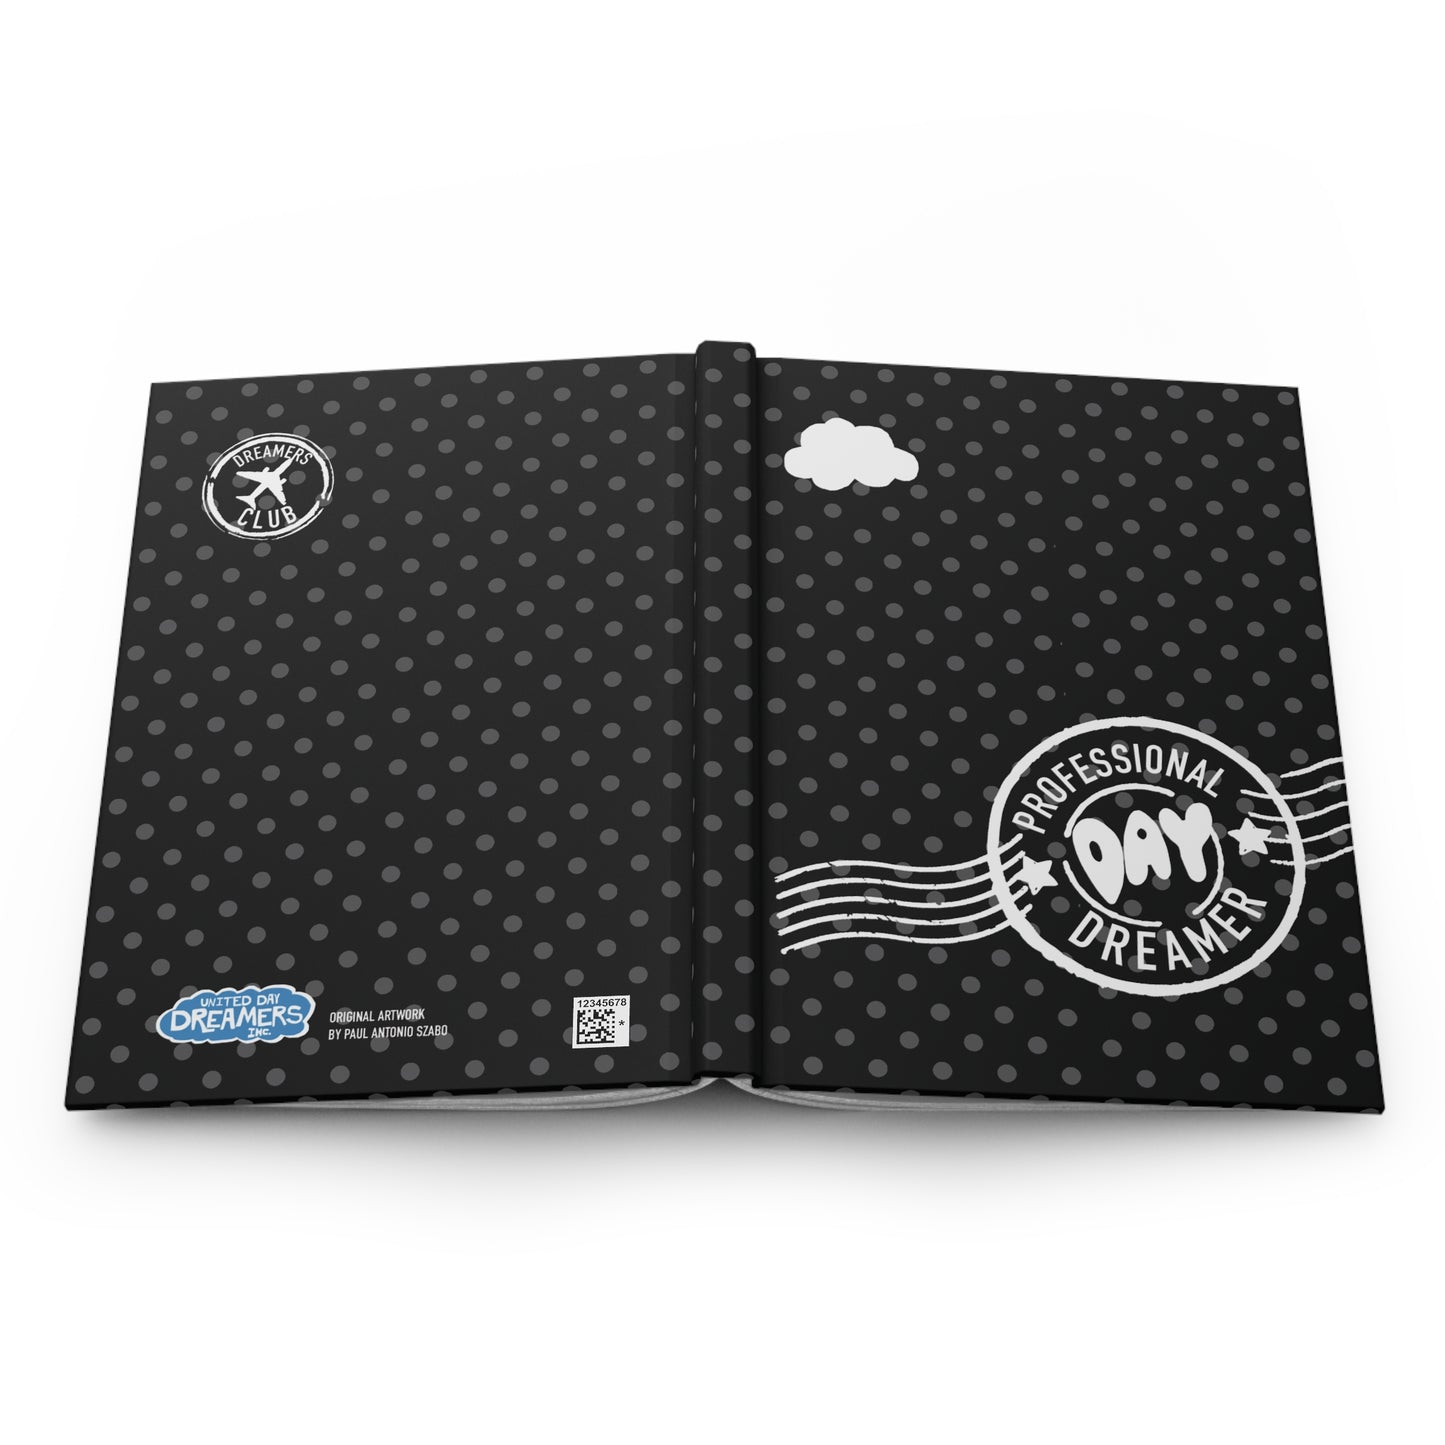 The Professional Day Dreamers Club Hardcover Black Notebook